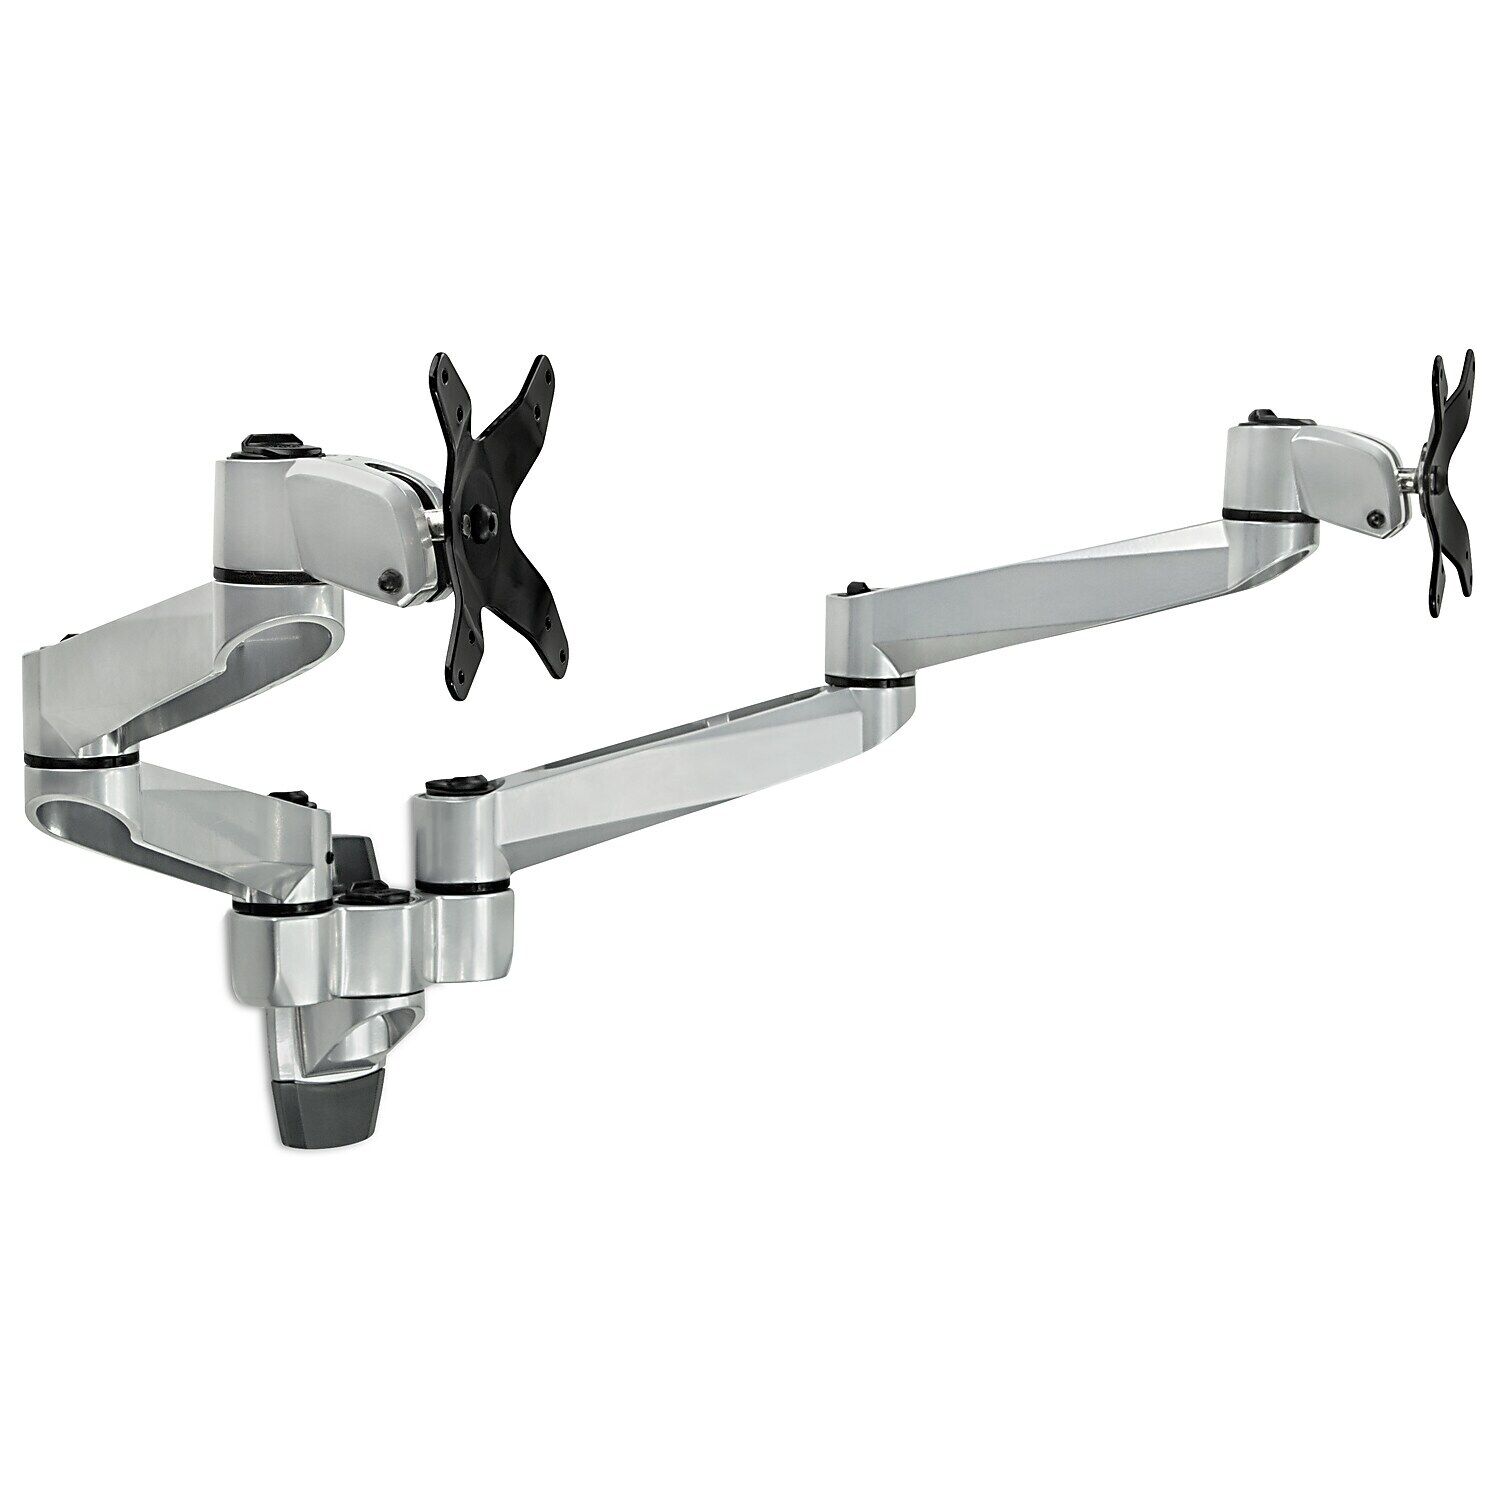 Mount-It Modular Dual Adjustable Monitor Arms Up to 24